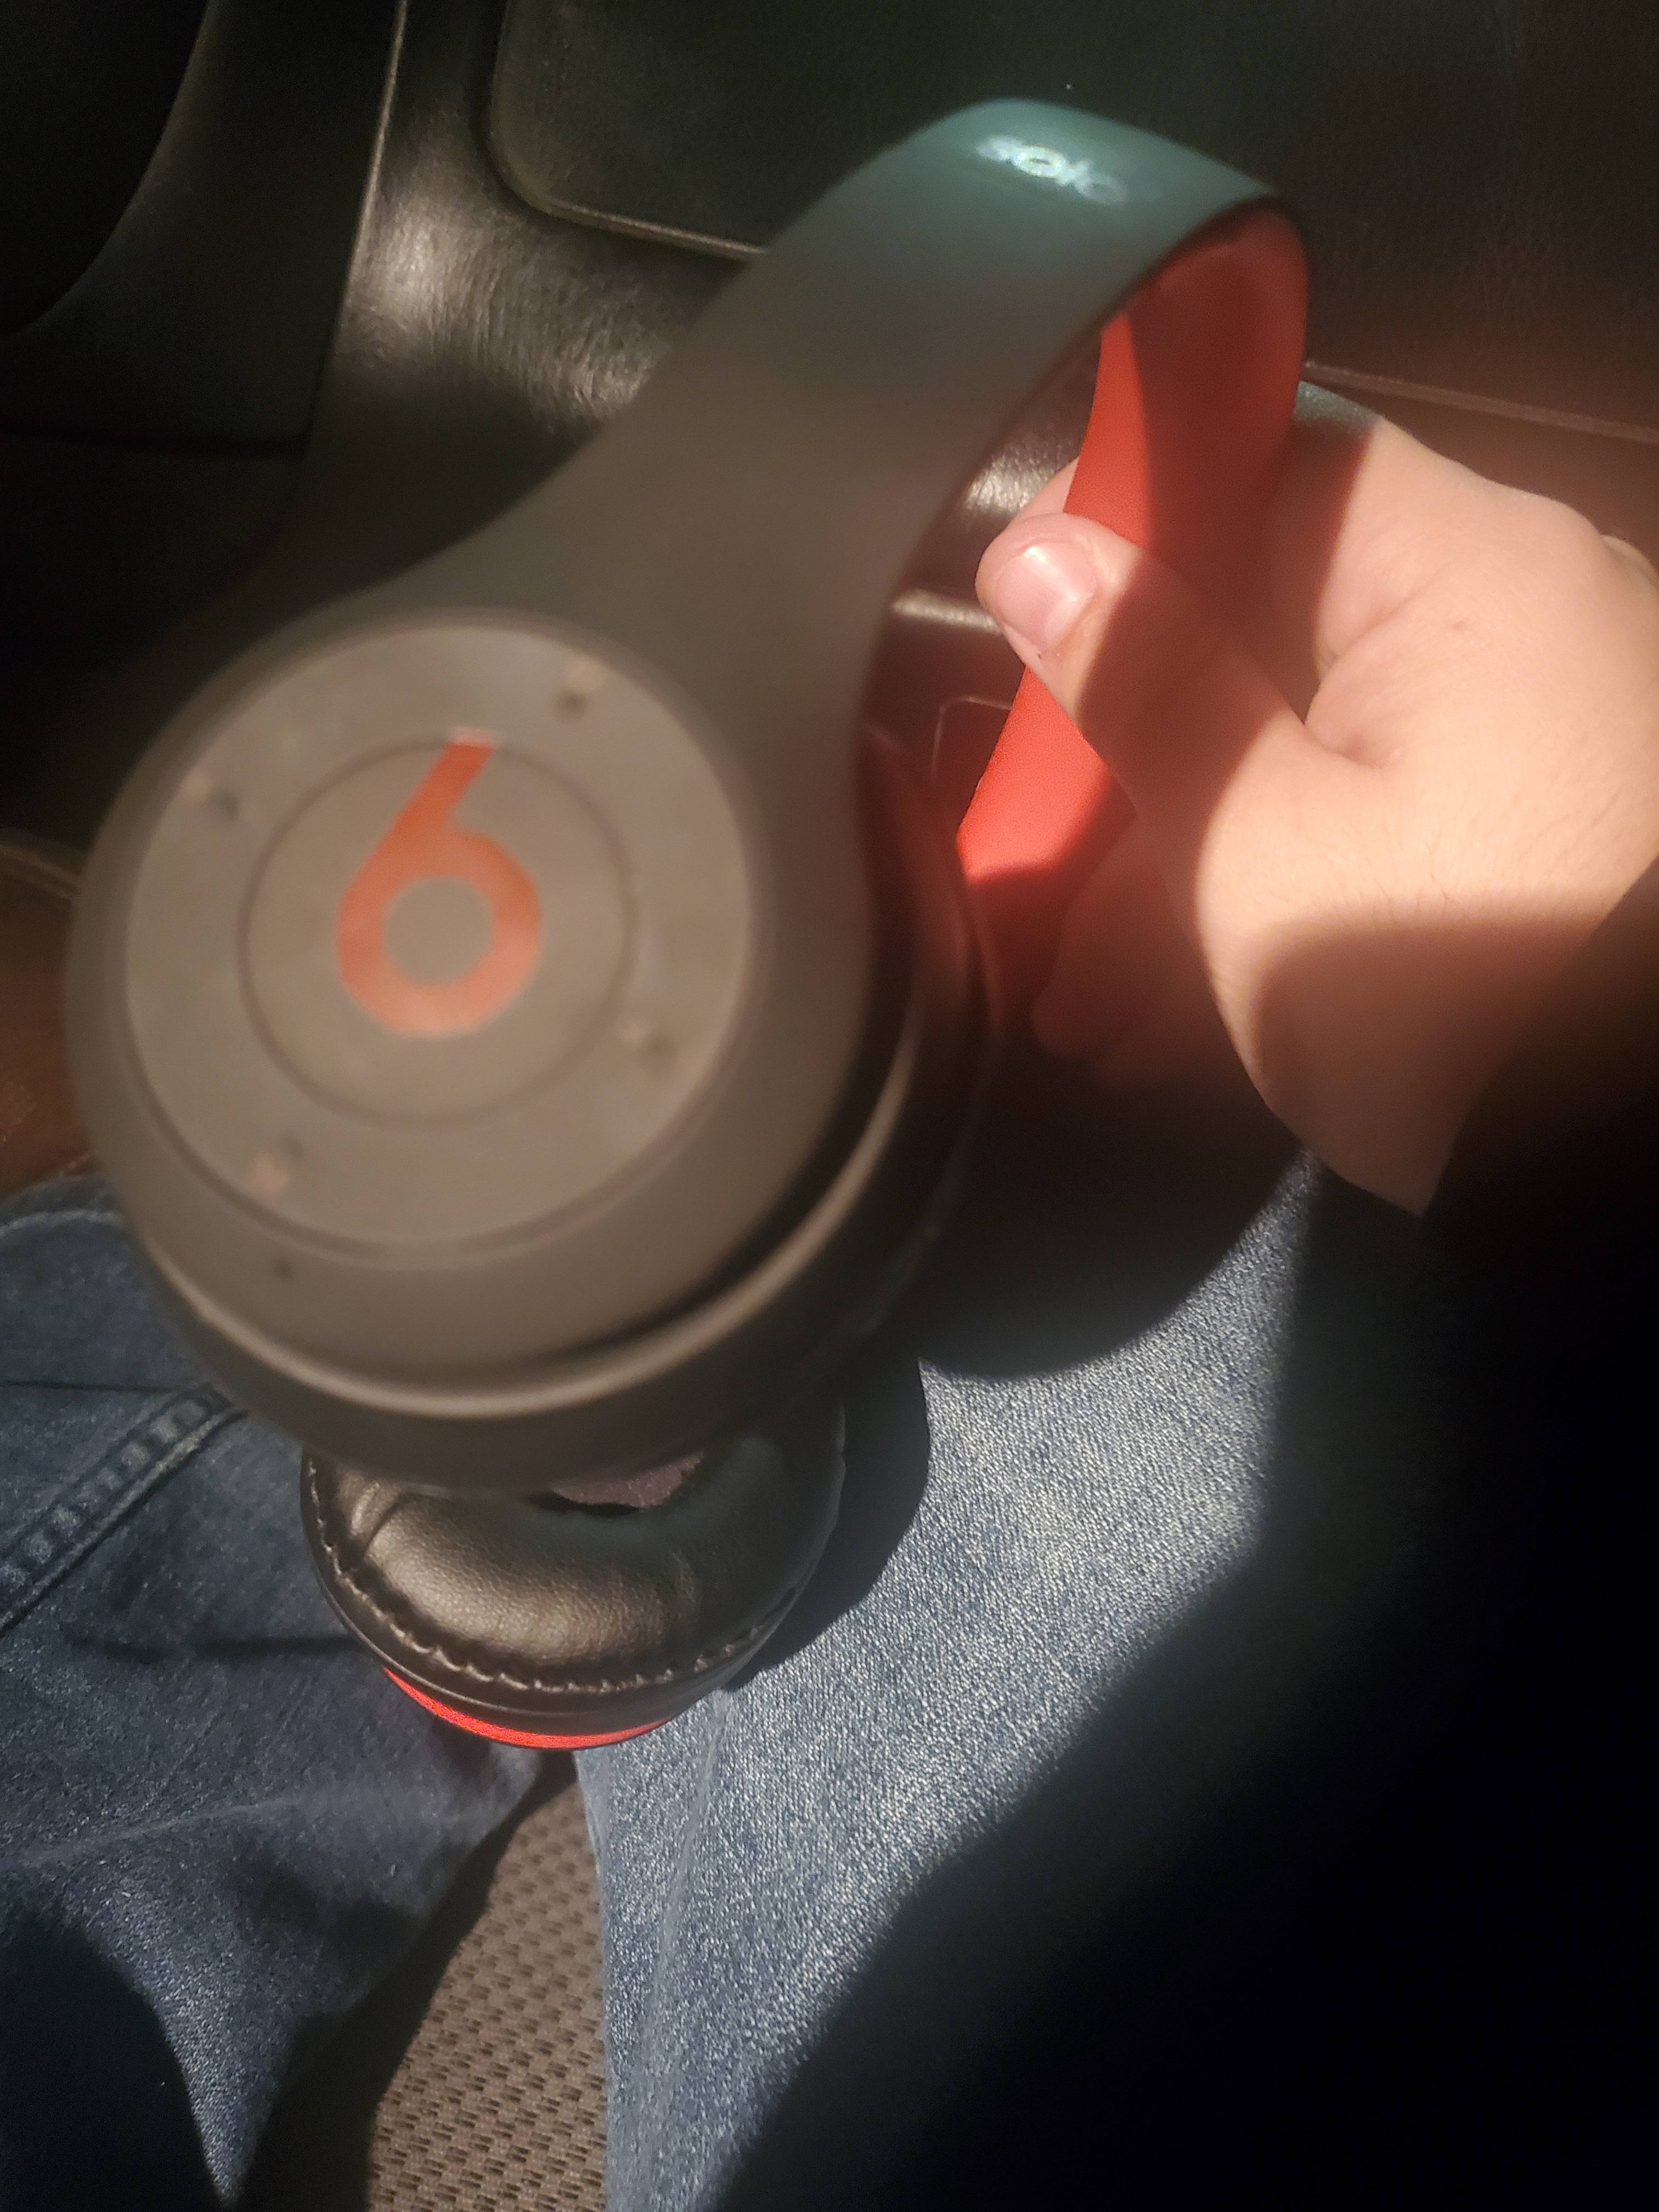 beats solo 3 knockoffs